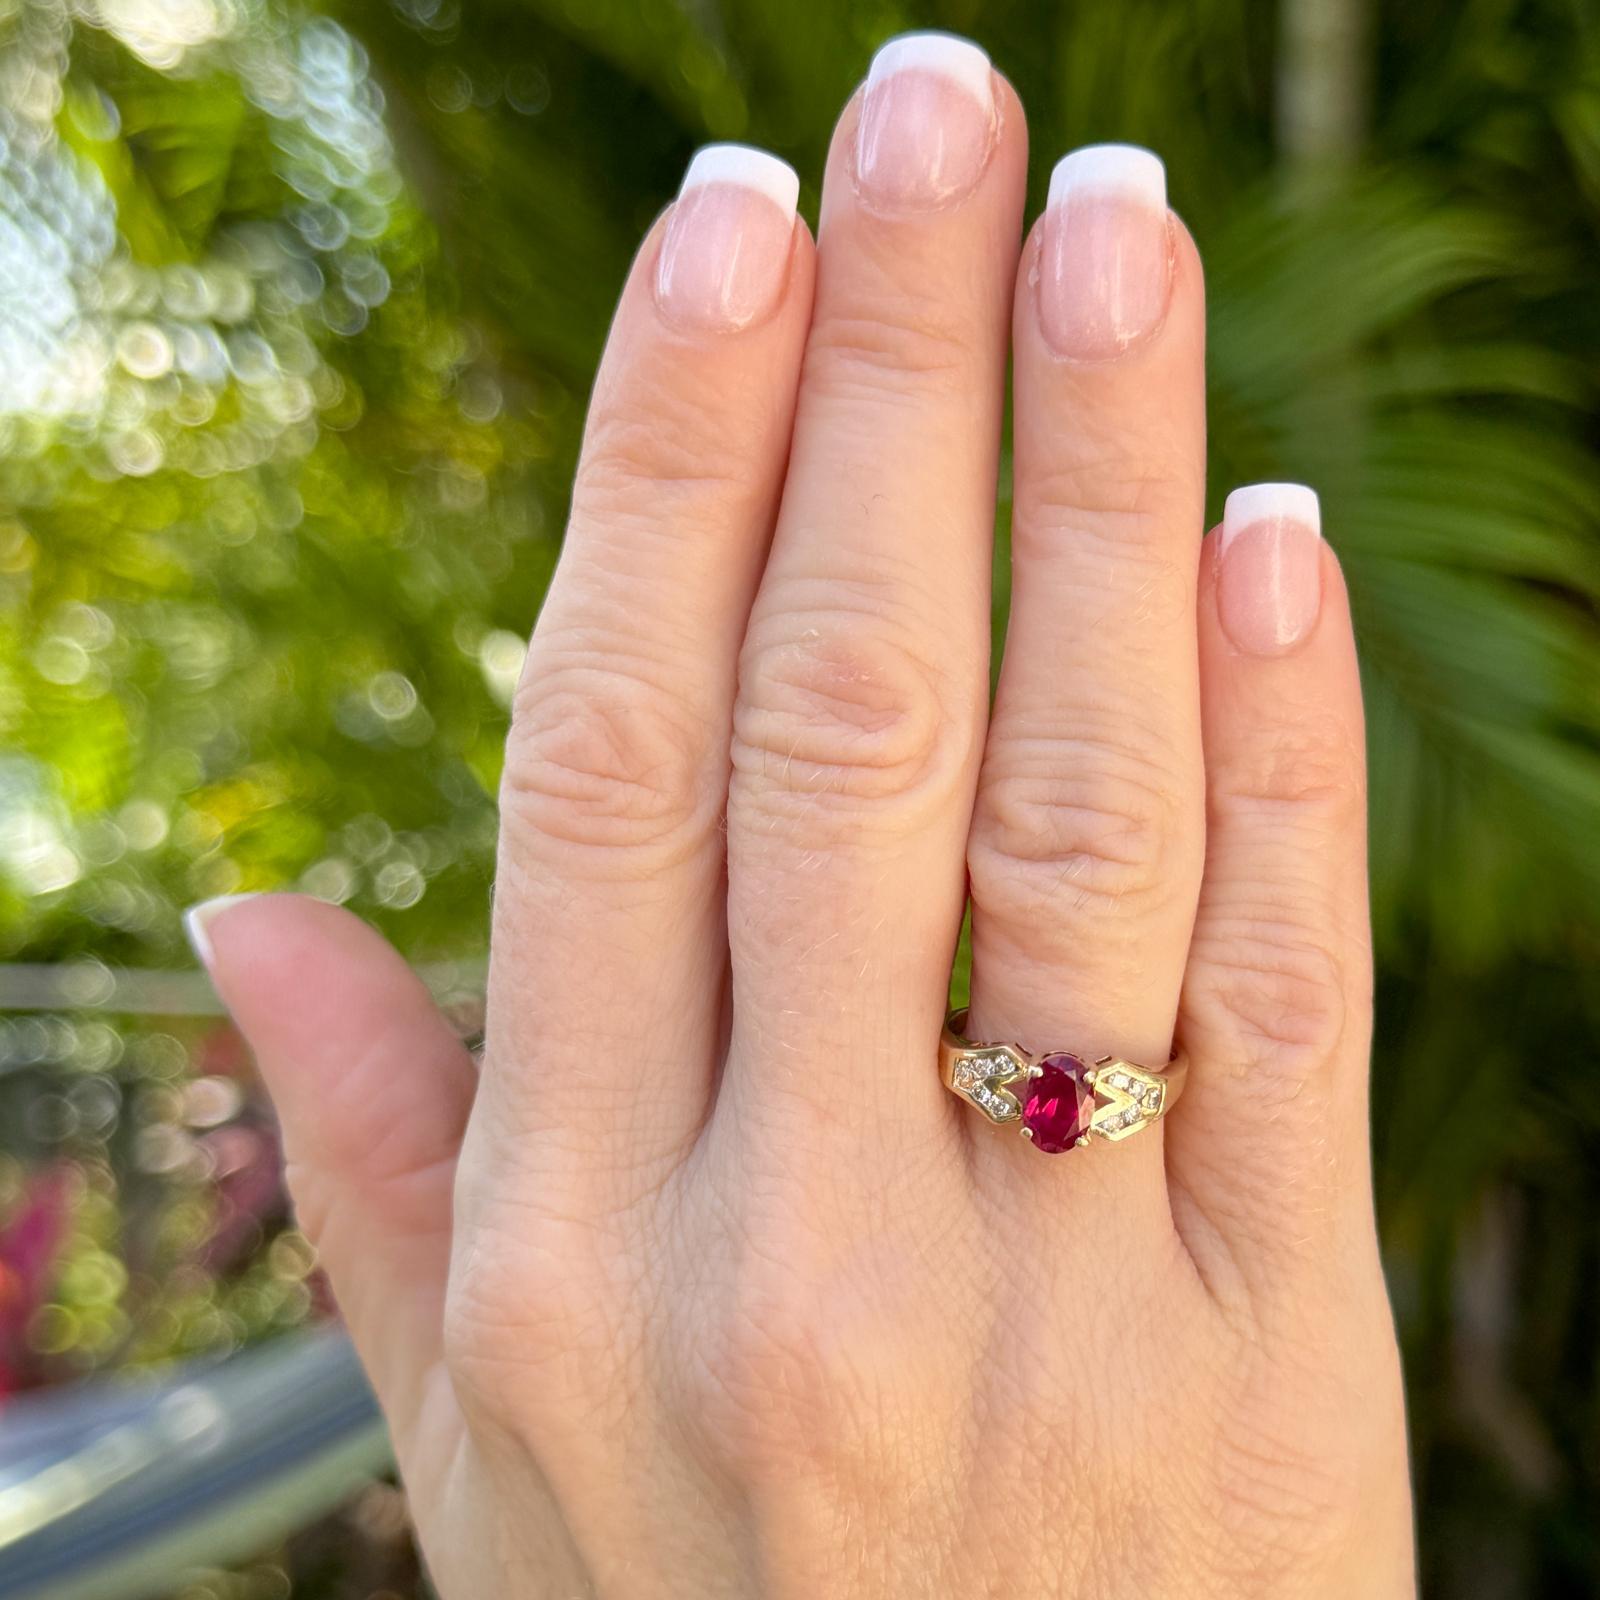 This vintage ring exudes classic charm and elegance with its captivating design. Crafted from 14 karat yellow gold, the ring features a vibrant oval ruby gemstone centerpiece weighing approximately 1.00 carat. The ruby is securely prong-set with 10